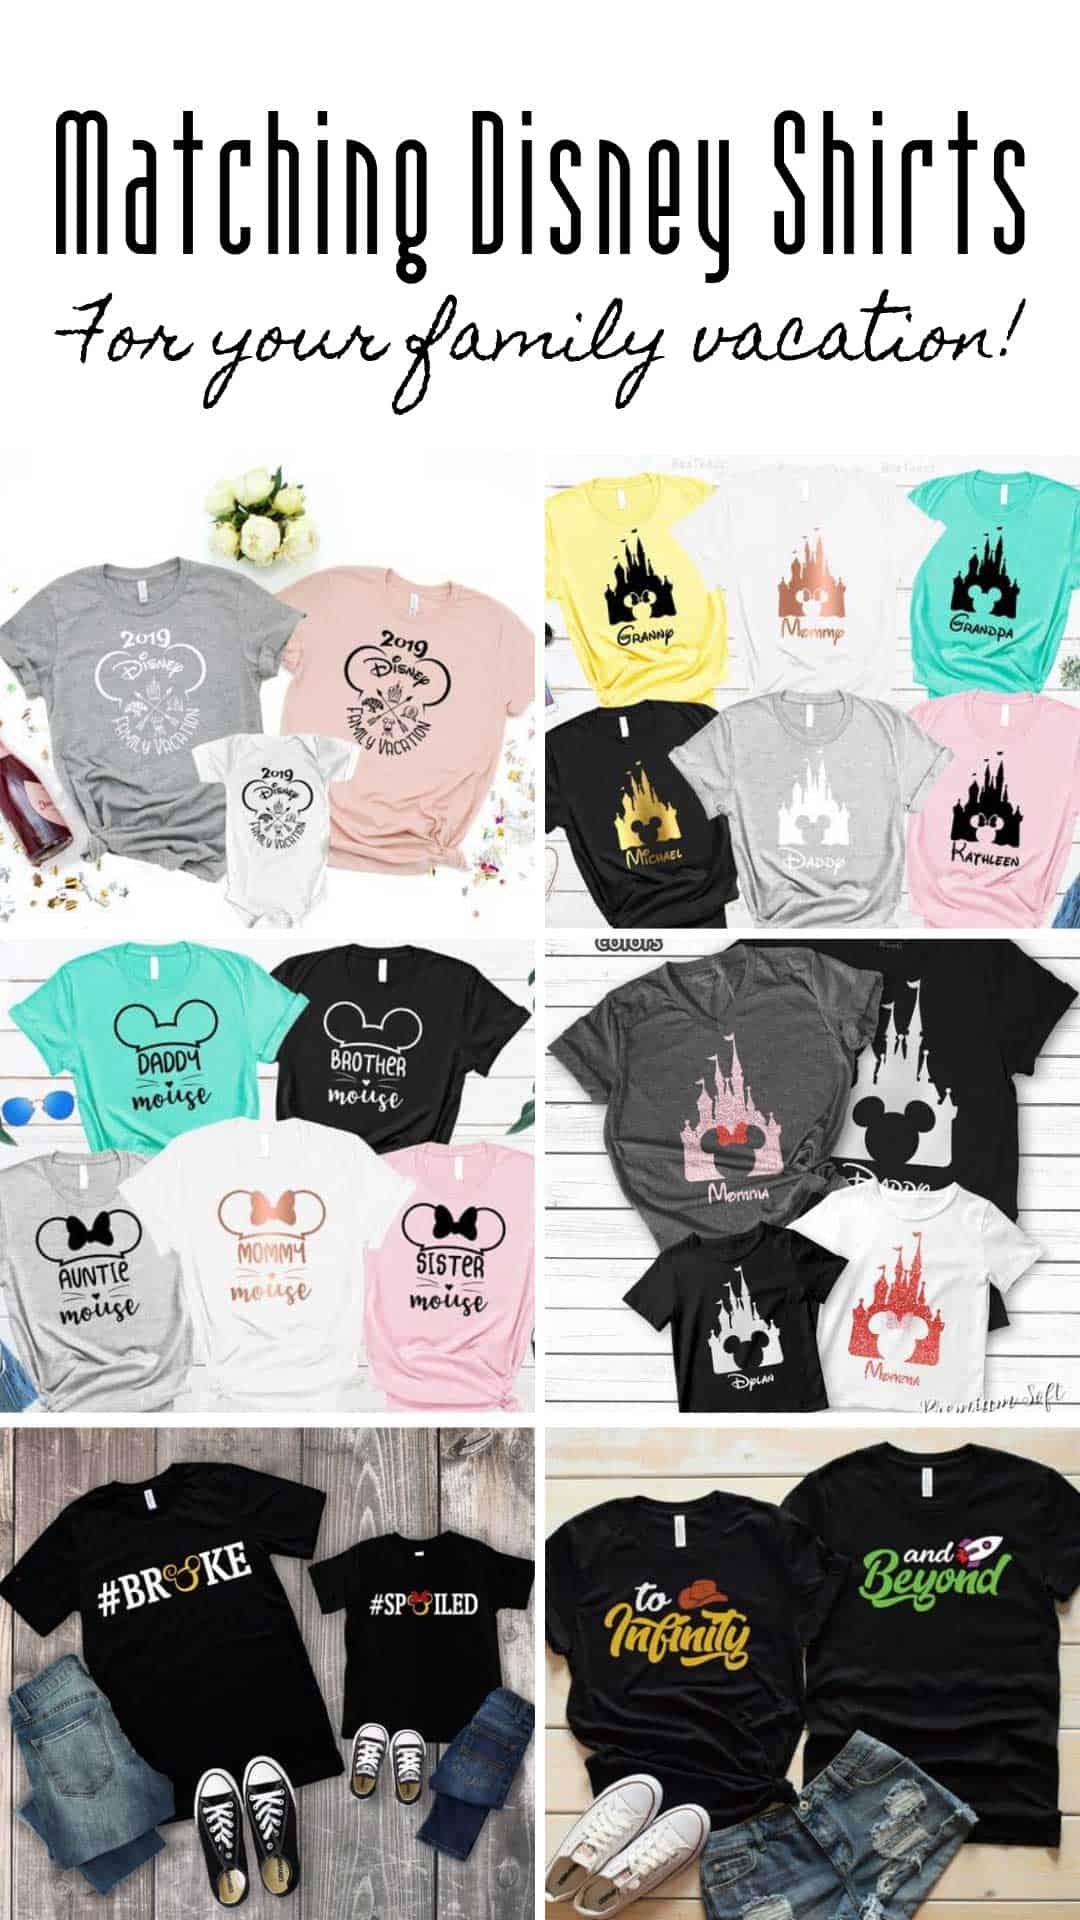 If you're looking for matching family Disney shirt ideas you got them right here! So many cute shirts your family will not be embarrased to be seen together in!